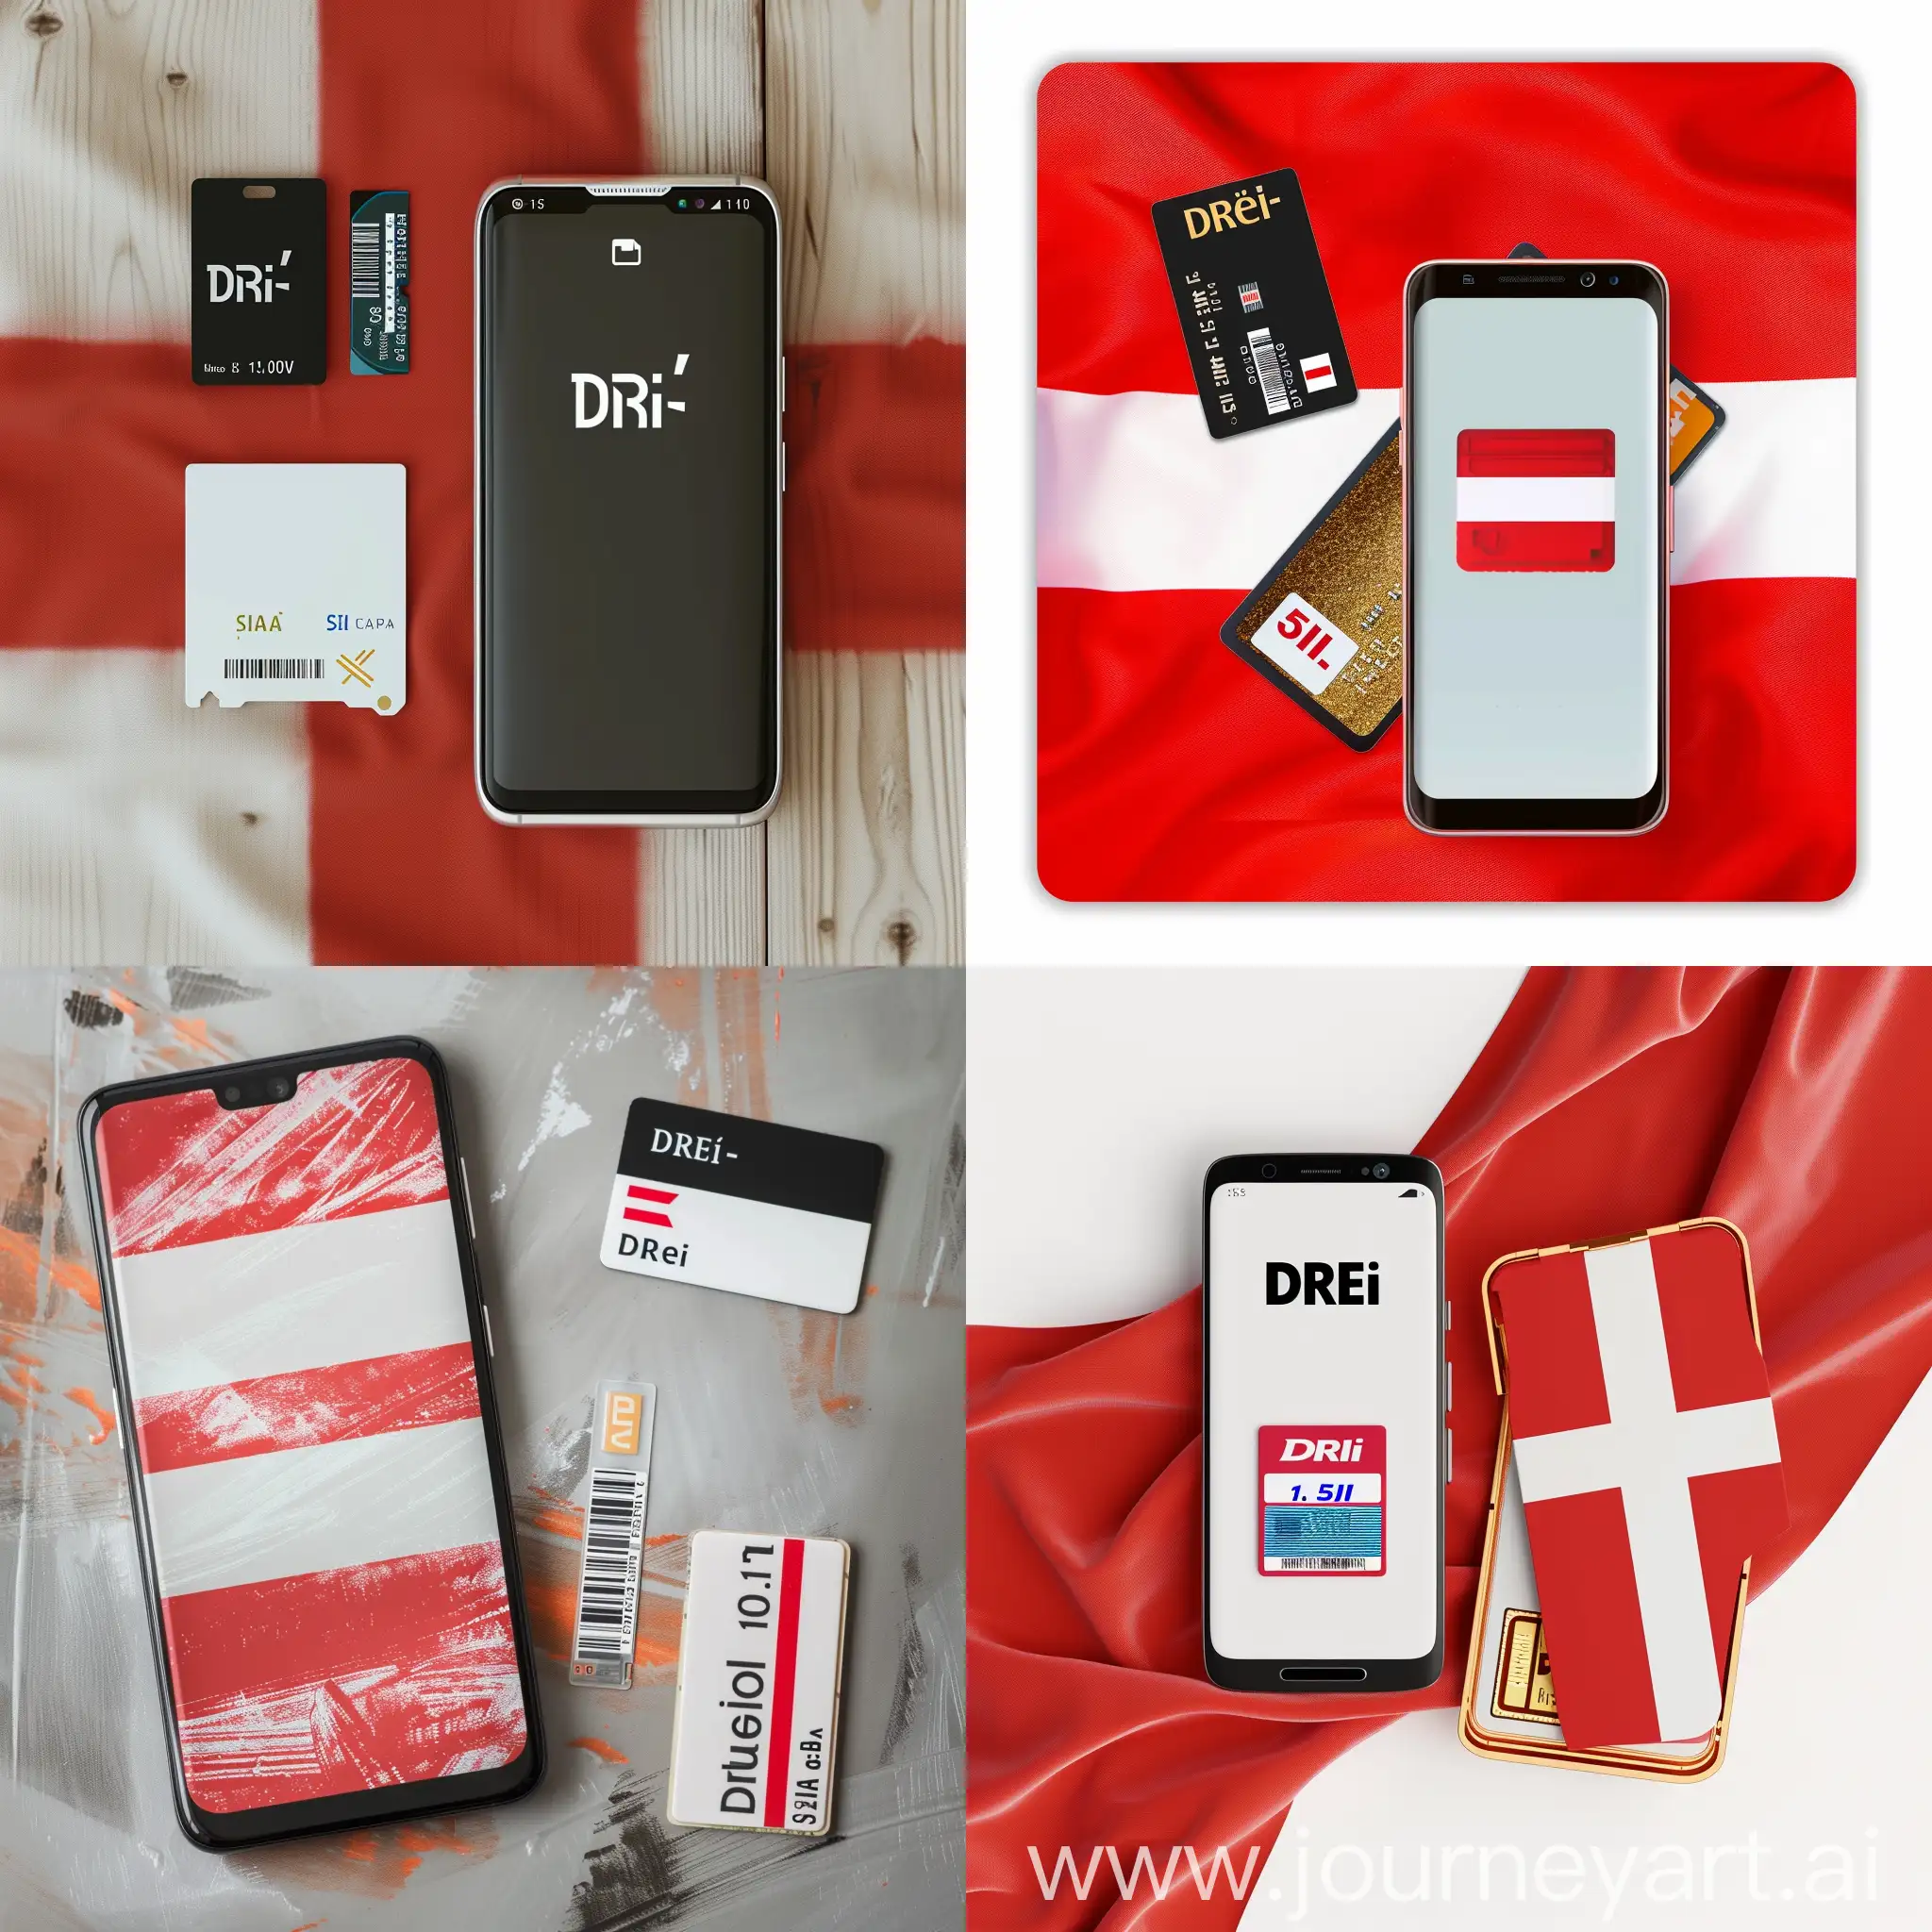 A background related to the Austrian flag, featuring a smart phone and a SIM card. The image must include the text 'Drei' and the text '0.5 USD'.